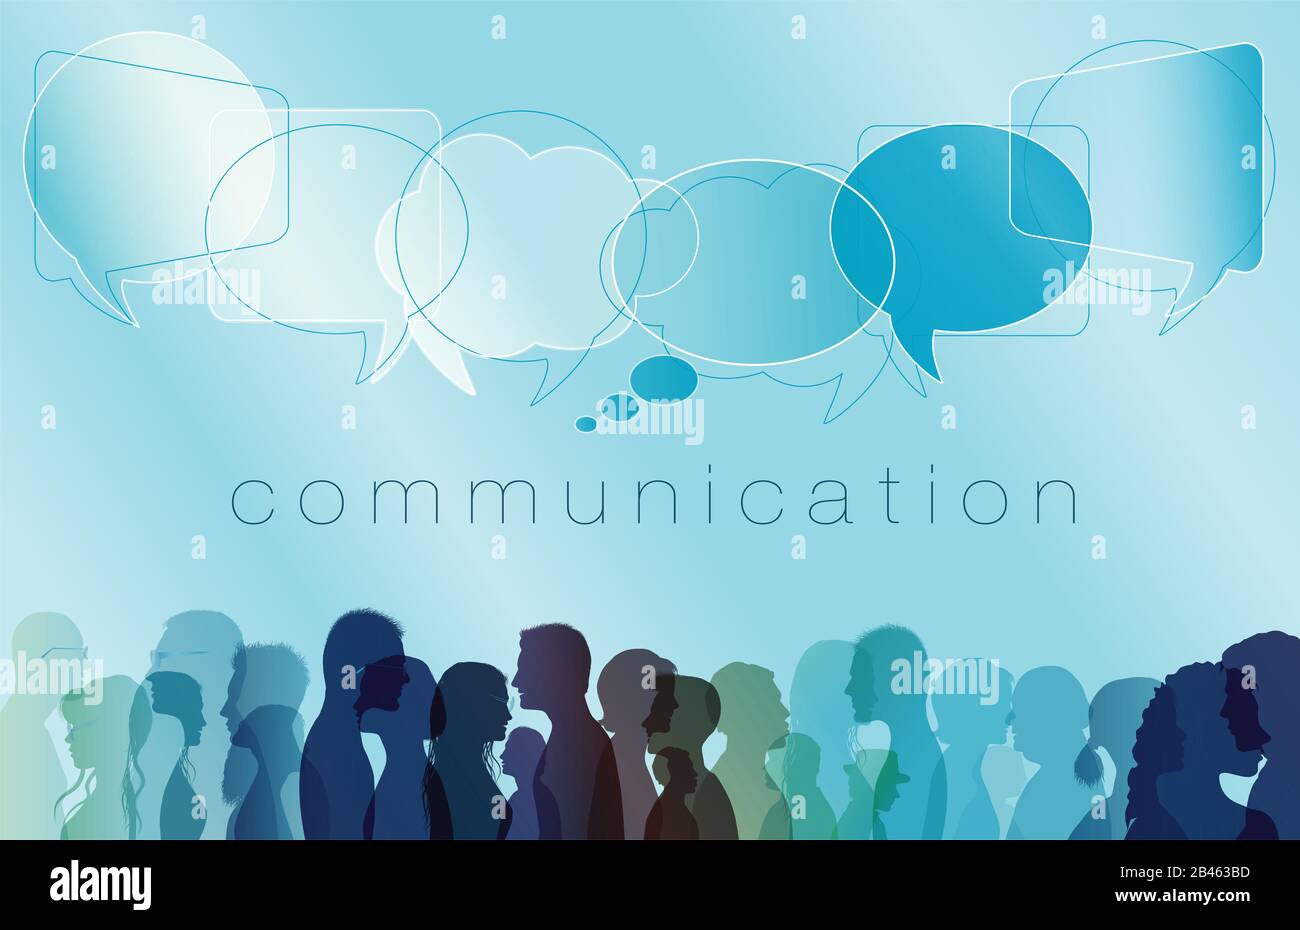 Diverse people. Large isolated group people in profile talking silhouette. Speech bubble. Crowd speaks. Concept to communicate. Social networking. Stock Photo